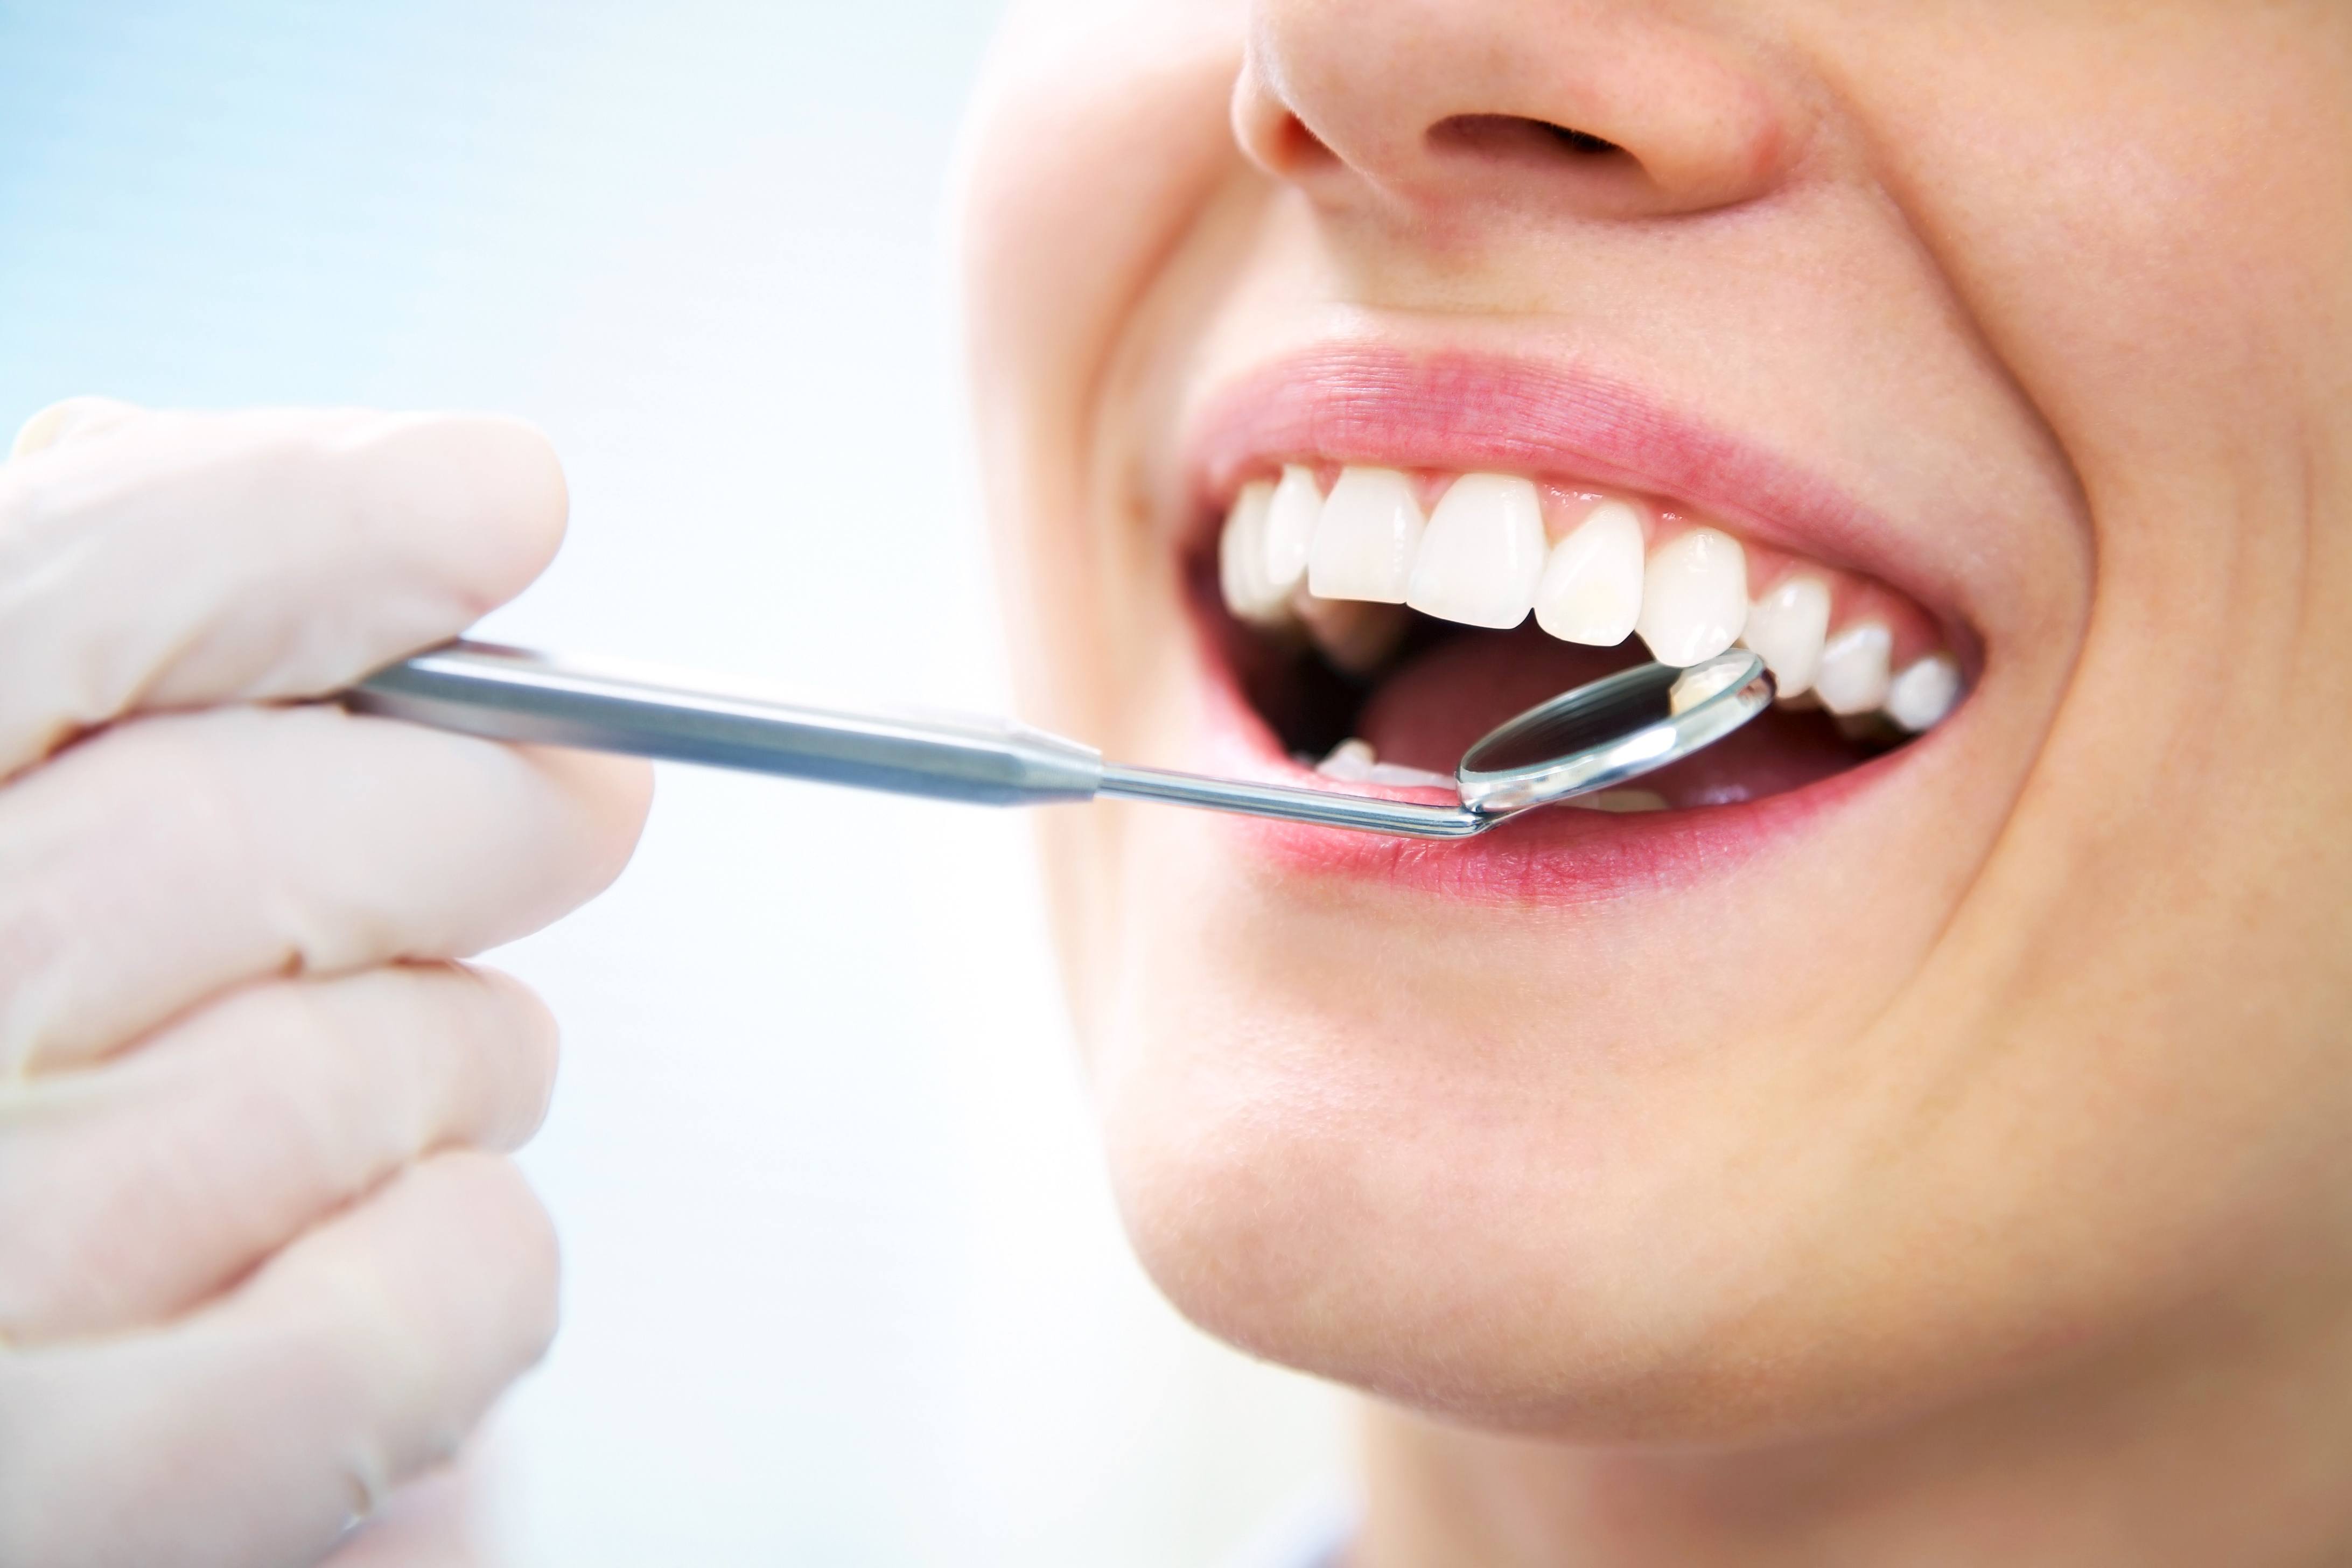 arlington dentist that can help you with all your dental needs